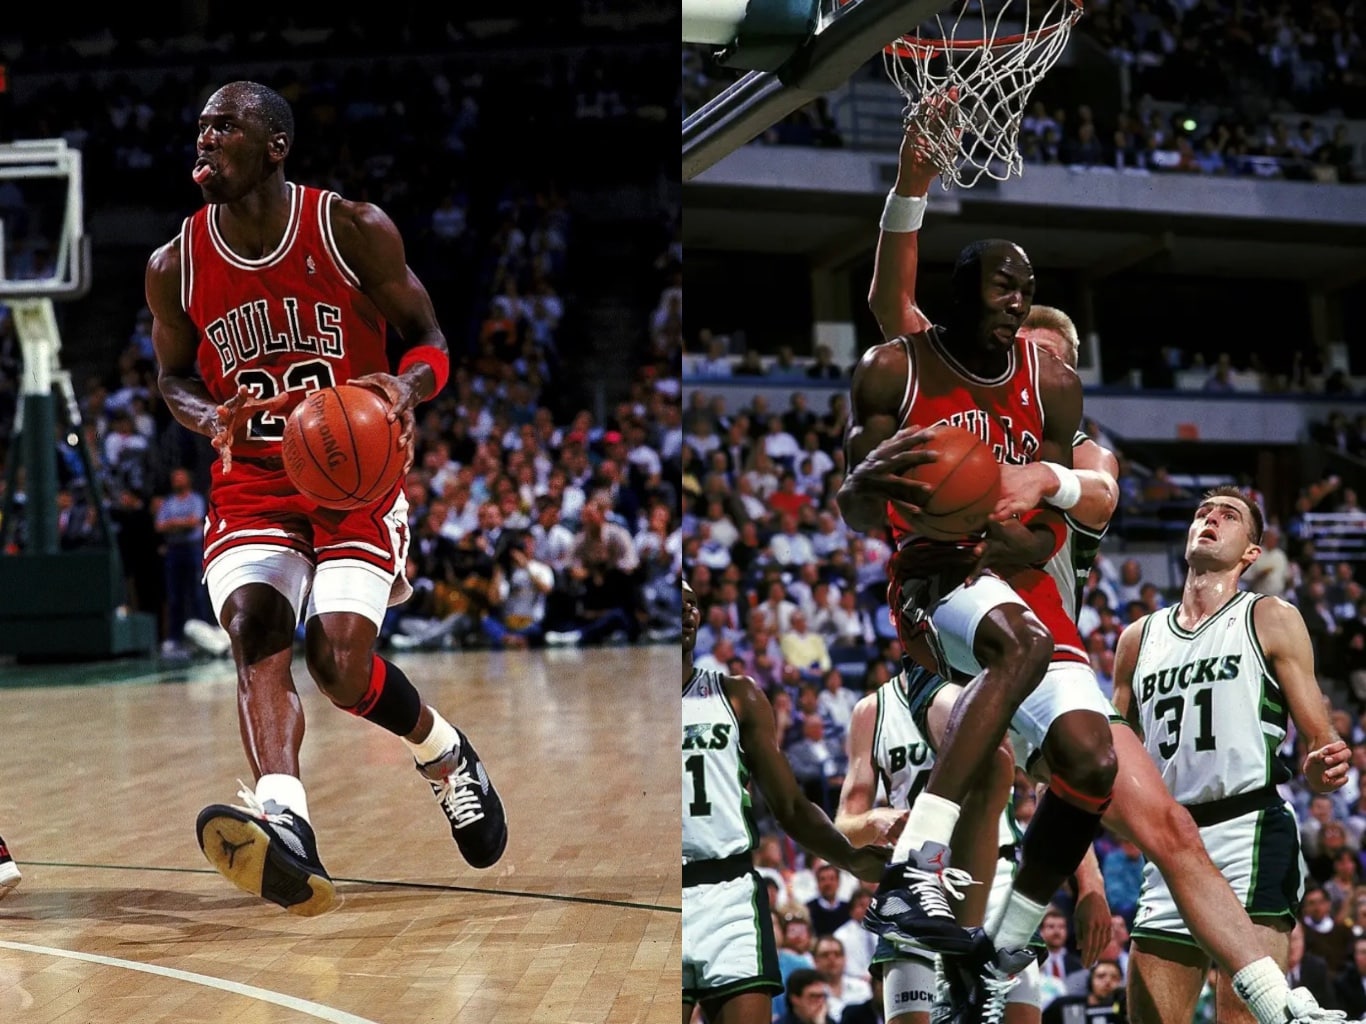 Jordan heads have been due for this revival for a long time